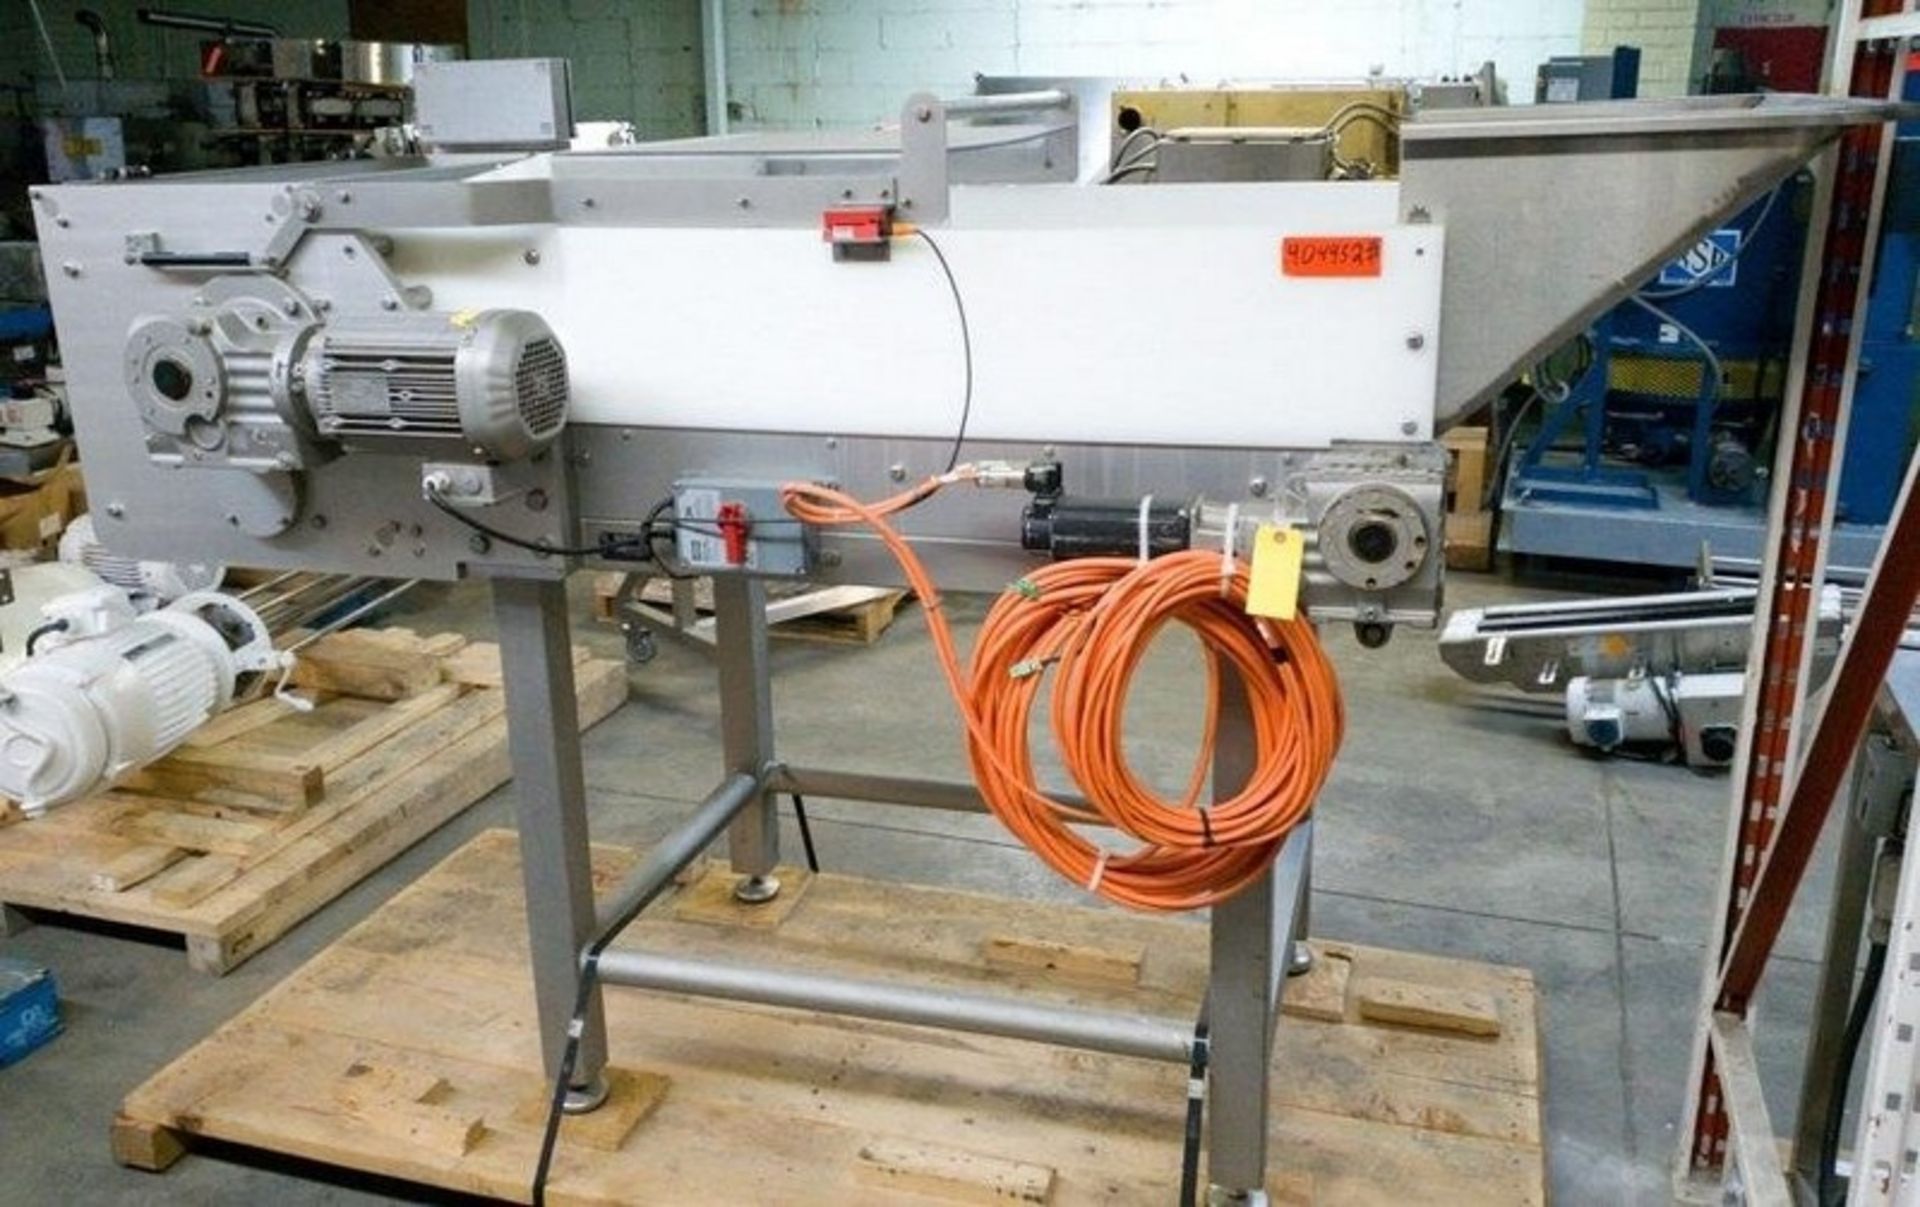 Sollich harmmer miller 208 / 480 volts 3 phases 60 hz Dimensions:62 inch high x 100 inch length x 54